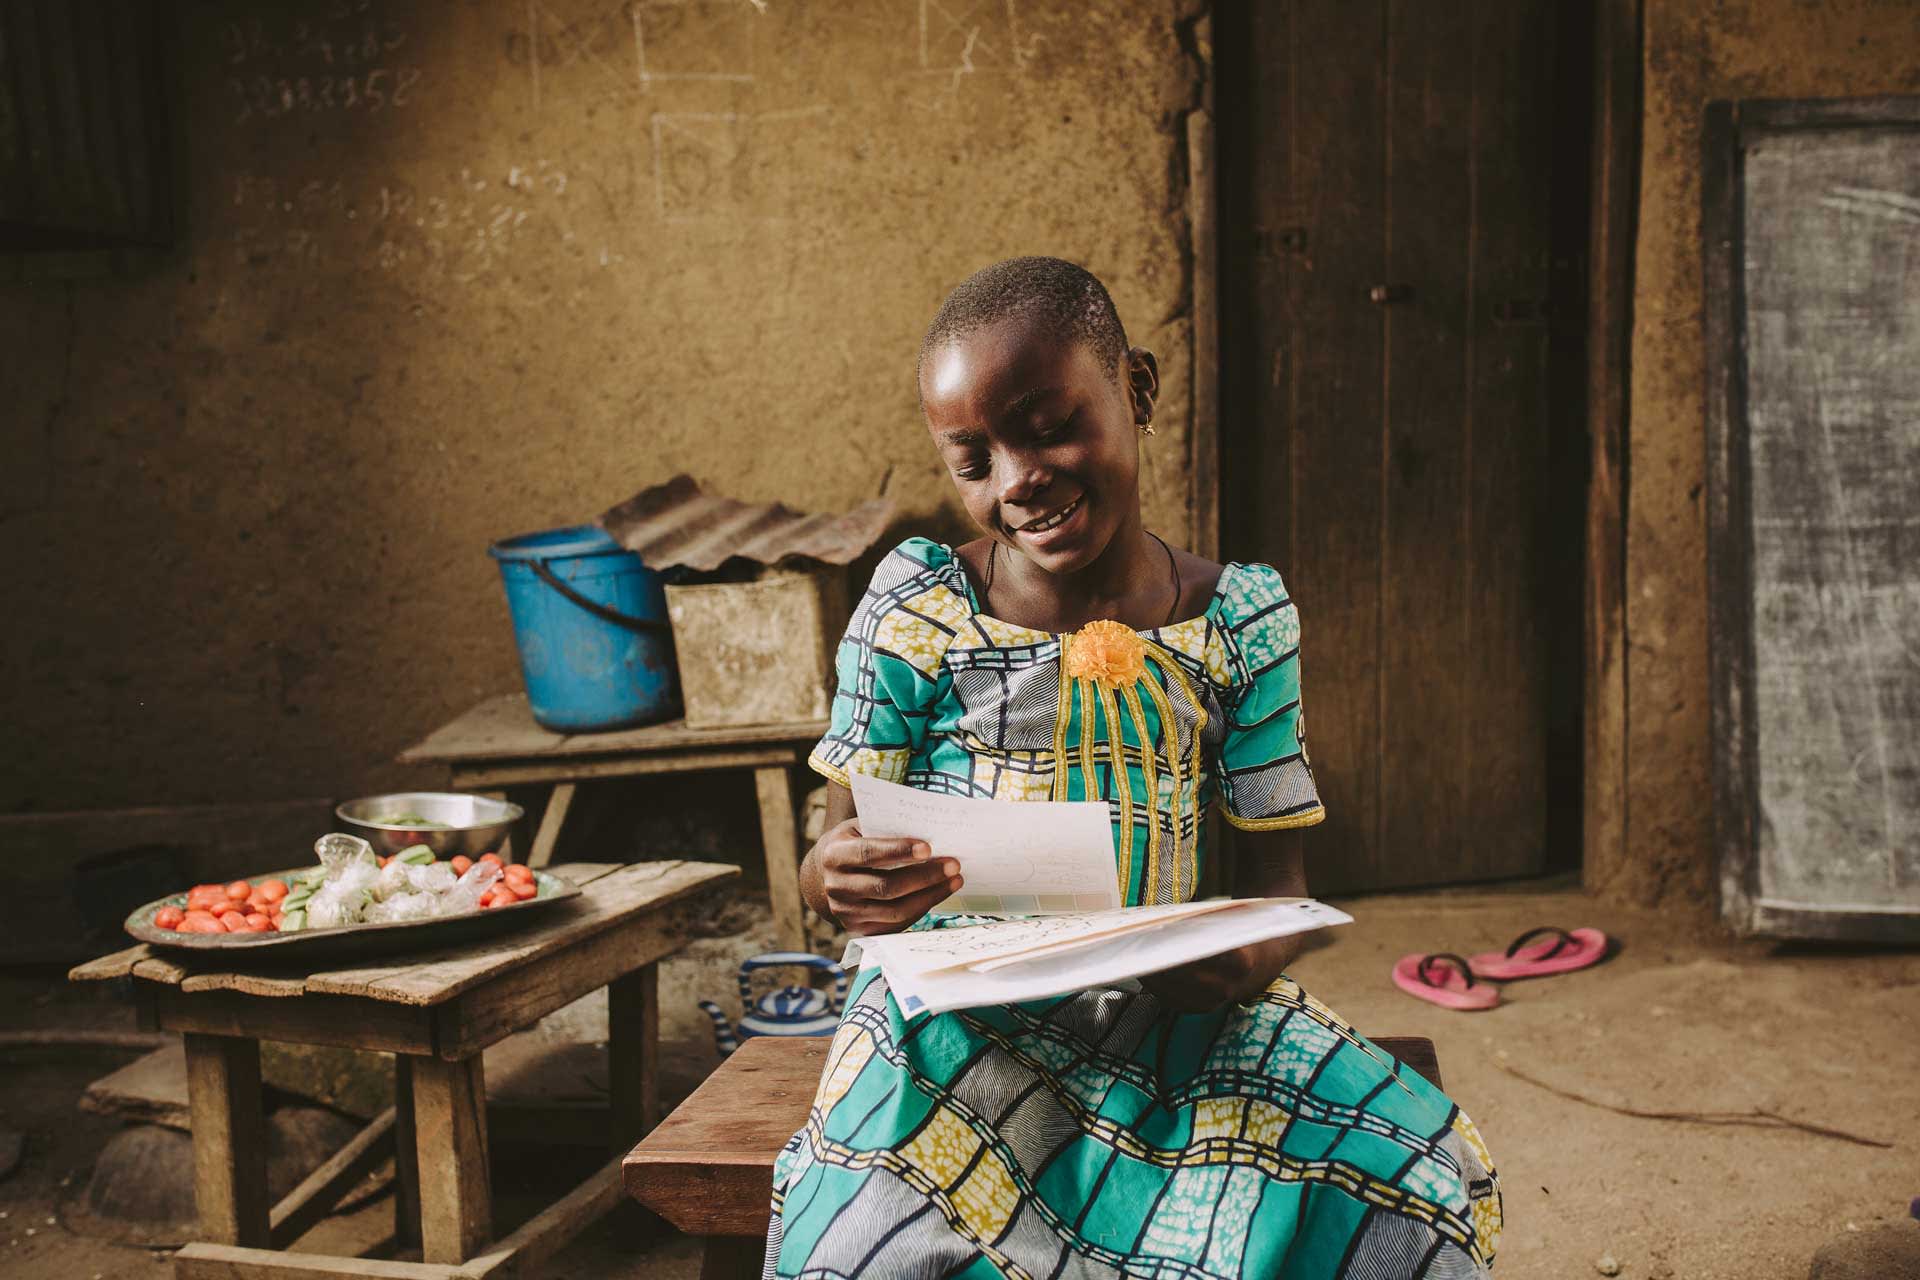 A young girl from Togo, in an ornate green dress, reads a letter from her sponsor.